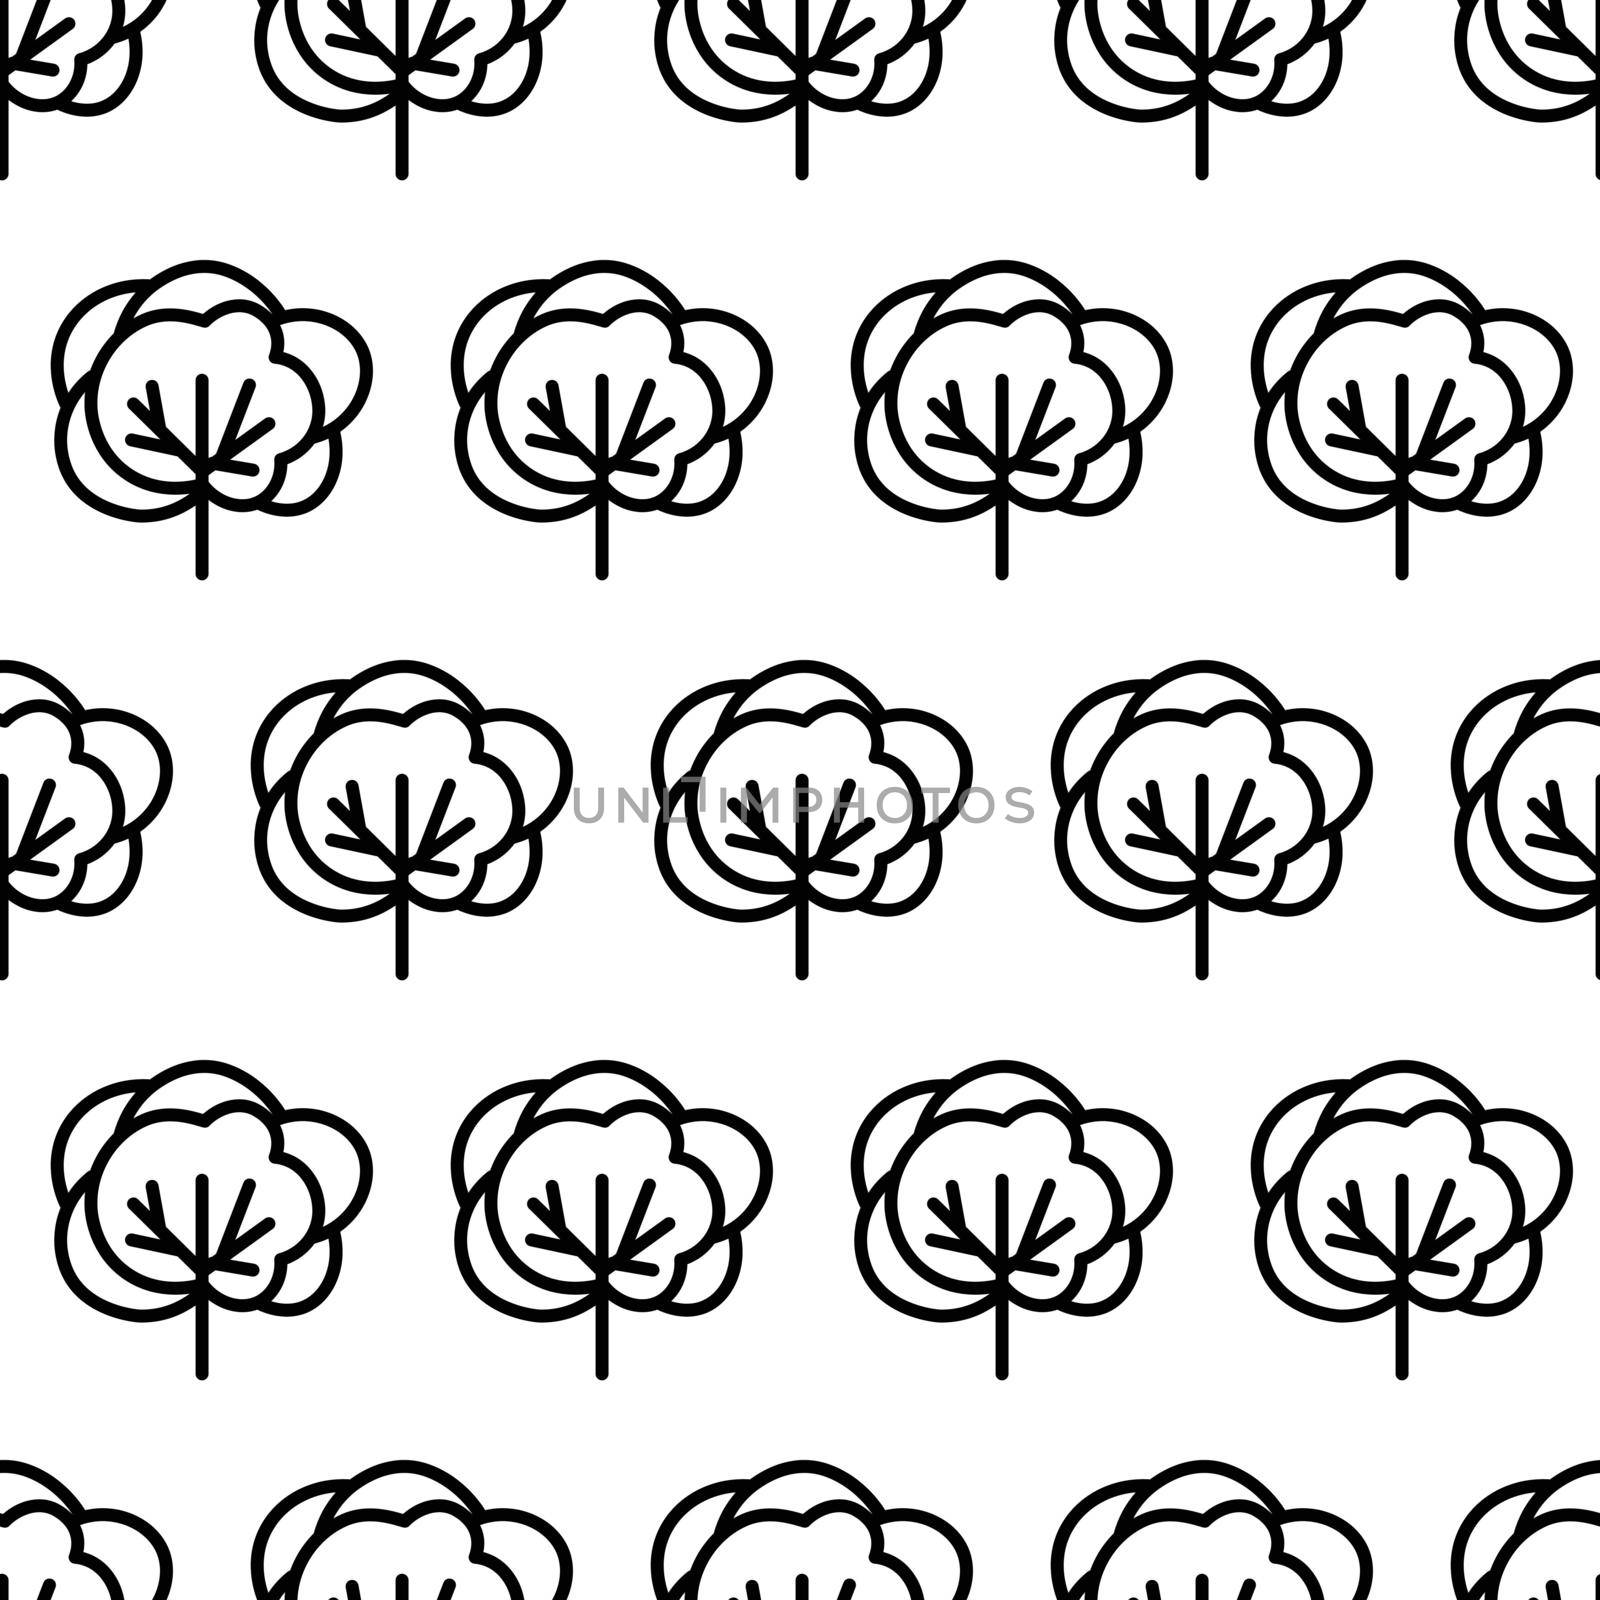 Black and white seamless pattern with tree icon. Vector trees symbol sign. Plants, landscape design for print, card, postcard, fabric, textile. Business idea concept by allaku